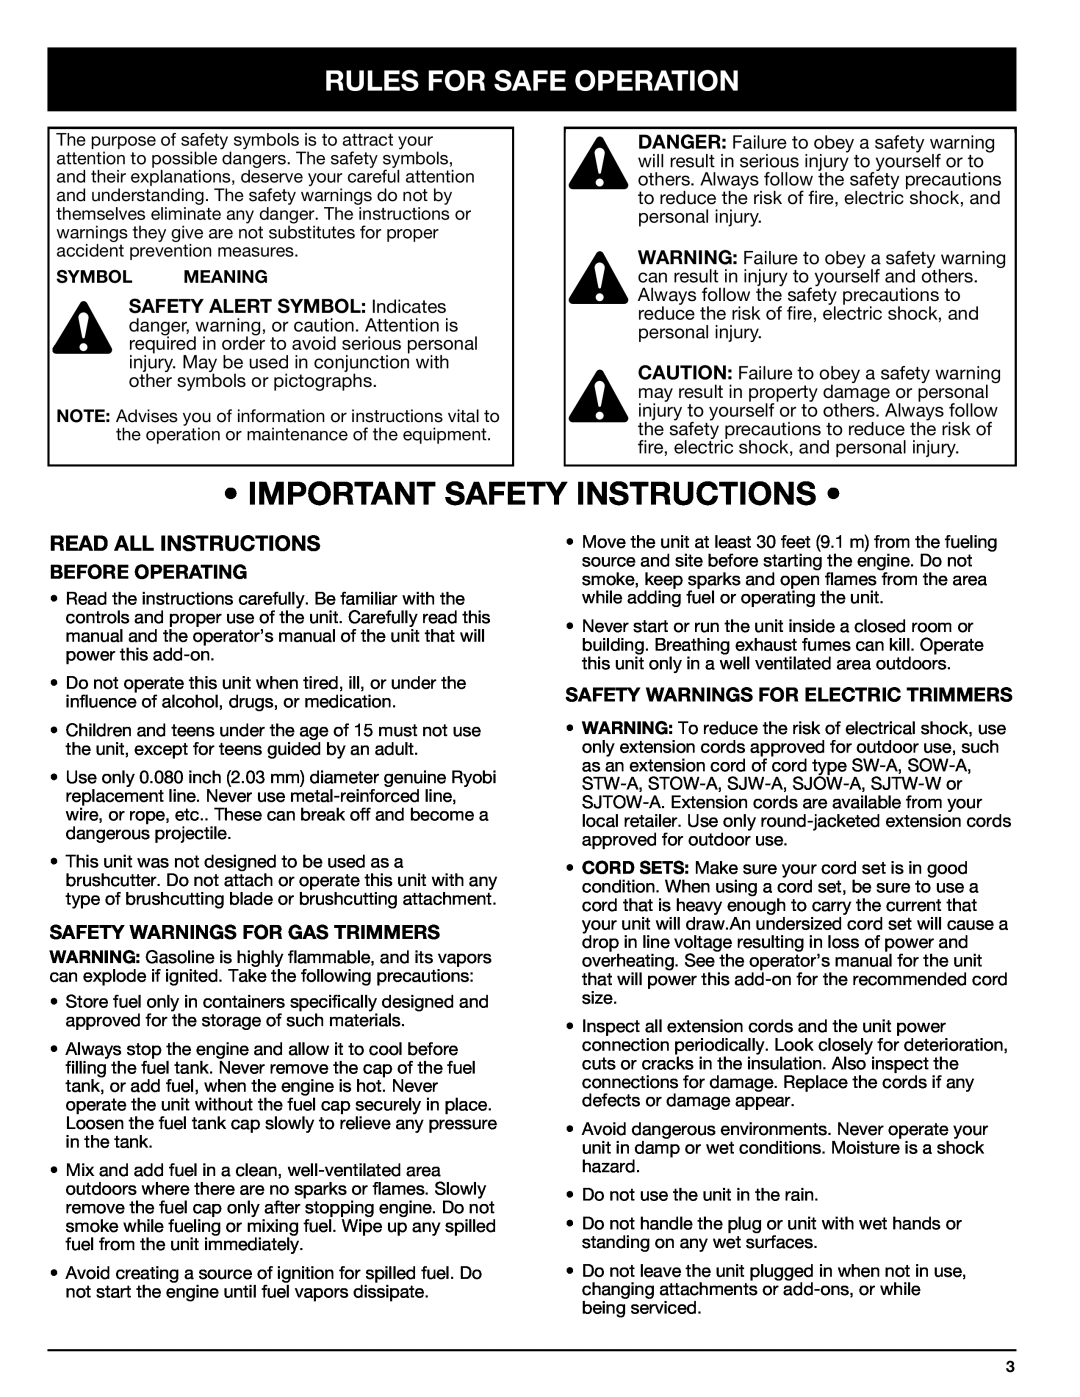 Ryobi SS725r manual Rules For Safe Operation, Read All Instructions, Before Operating, Safety Warnings For Gas Trimmers 